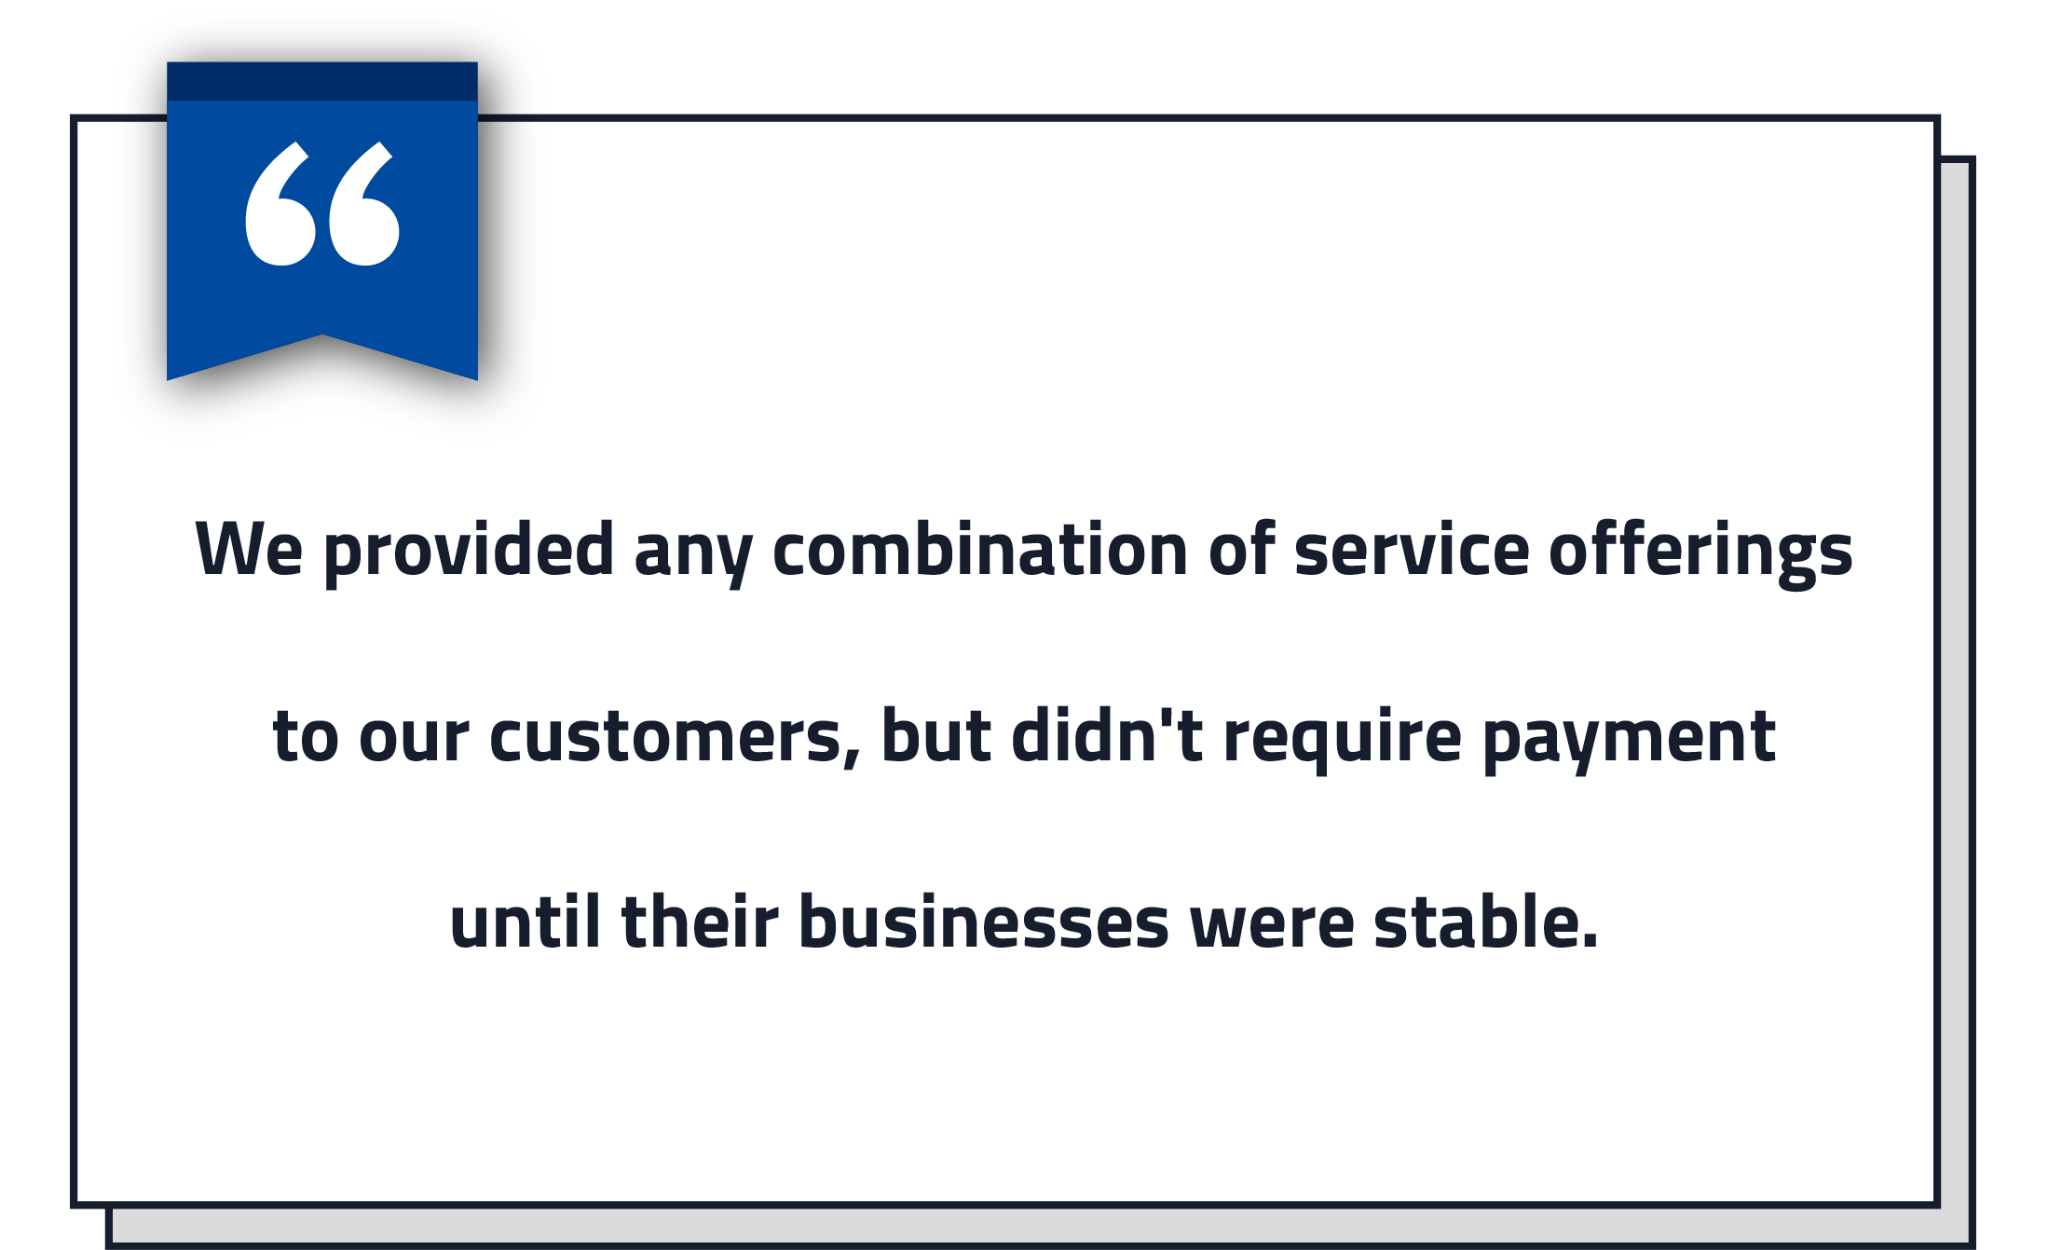 miles-technologies-quote-providing-services-without-requiring-immediate-payment-covid-19-assistance-program